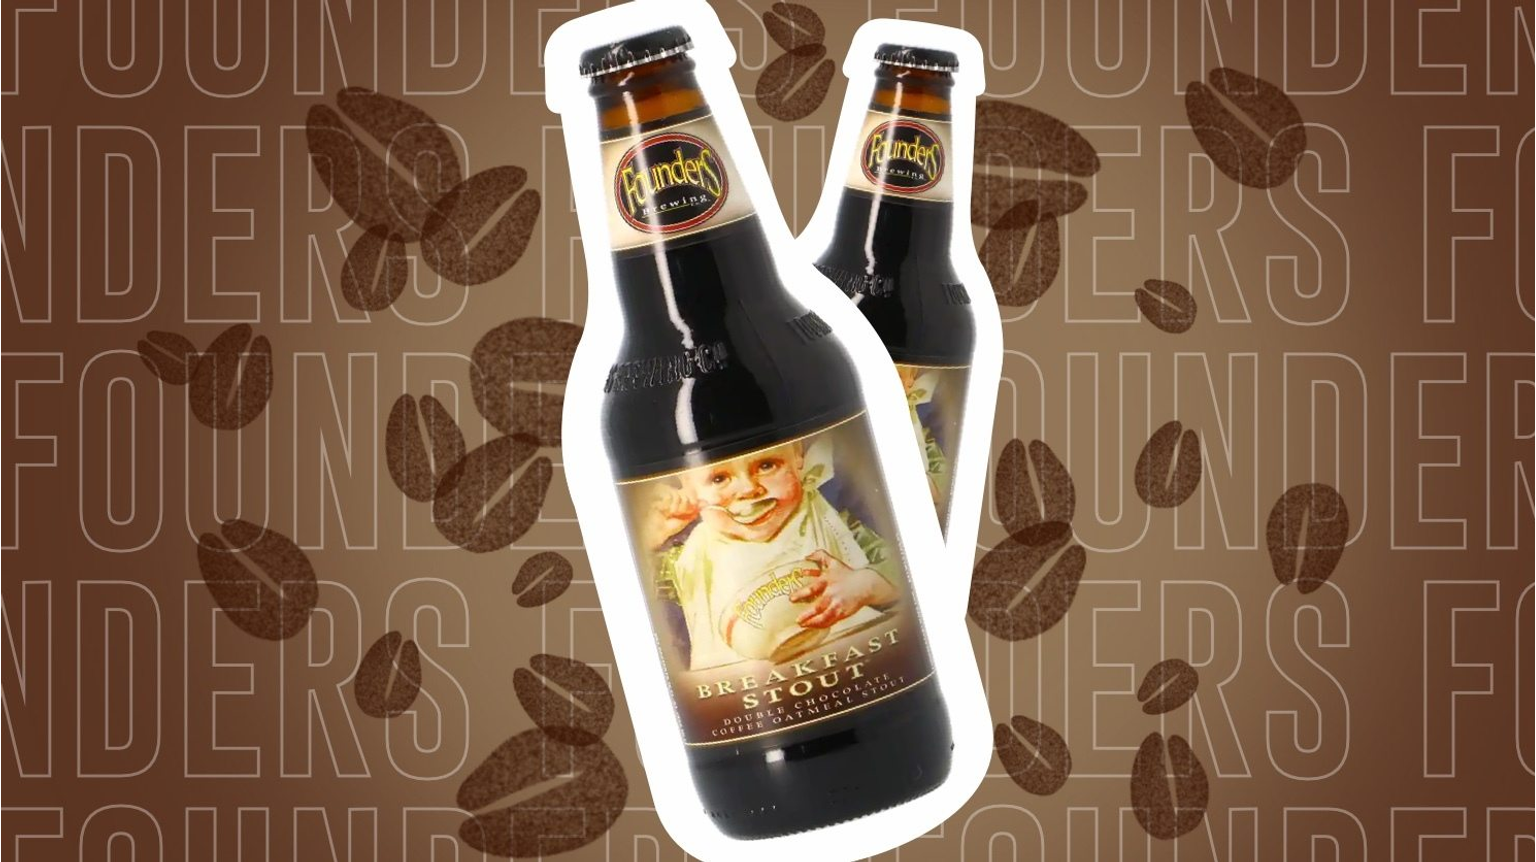 thumbnail for blog article named: Breakfast Stout - Founders